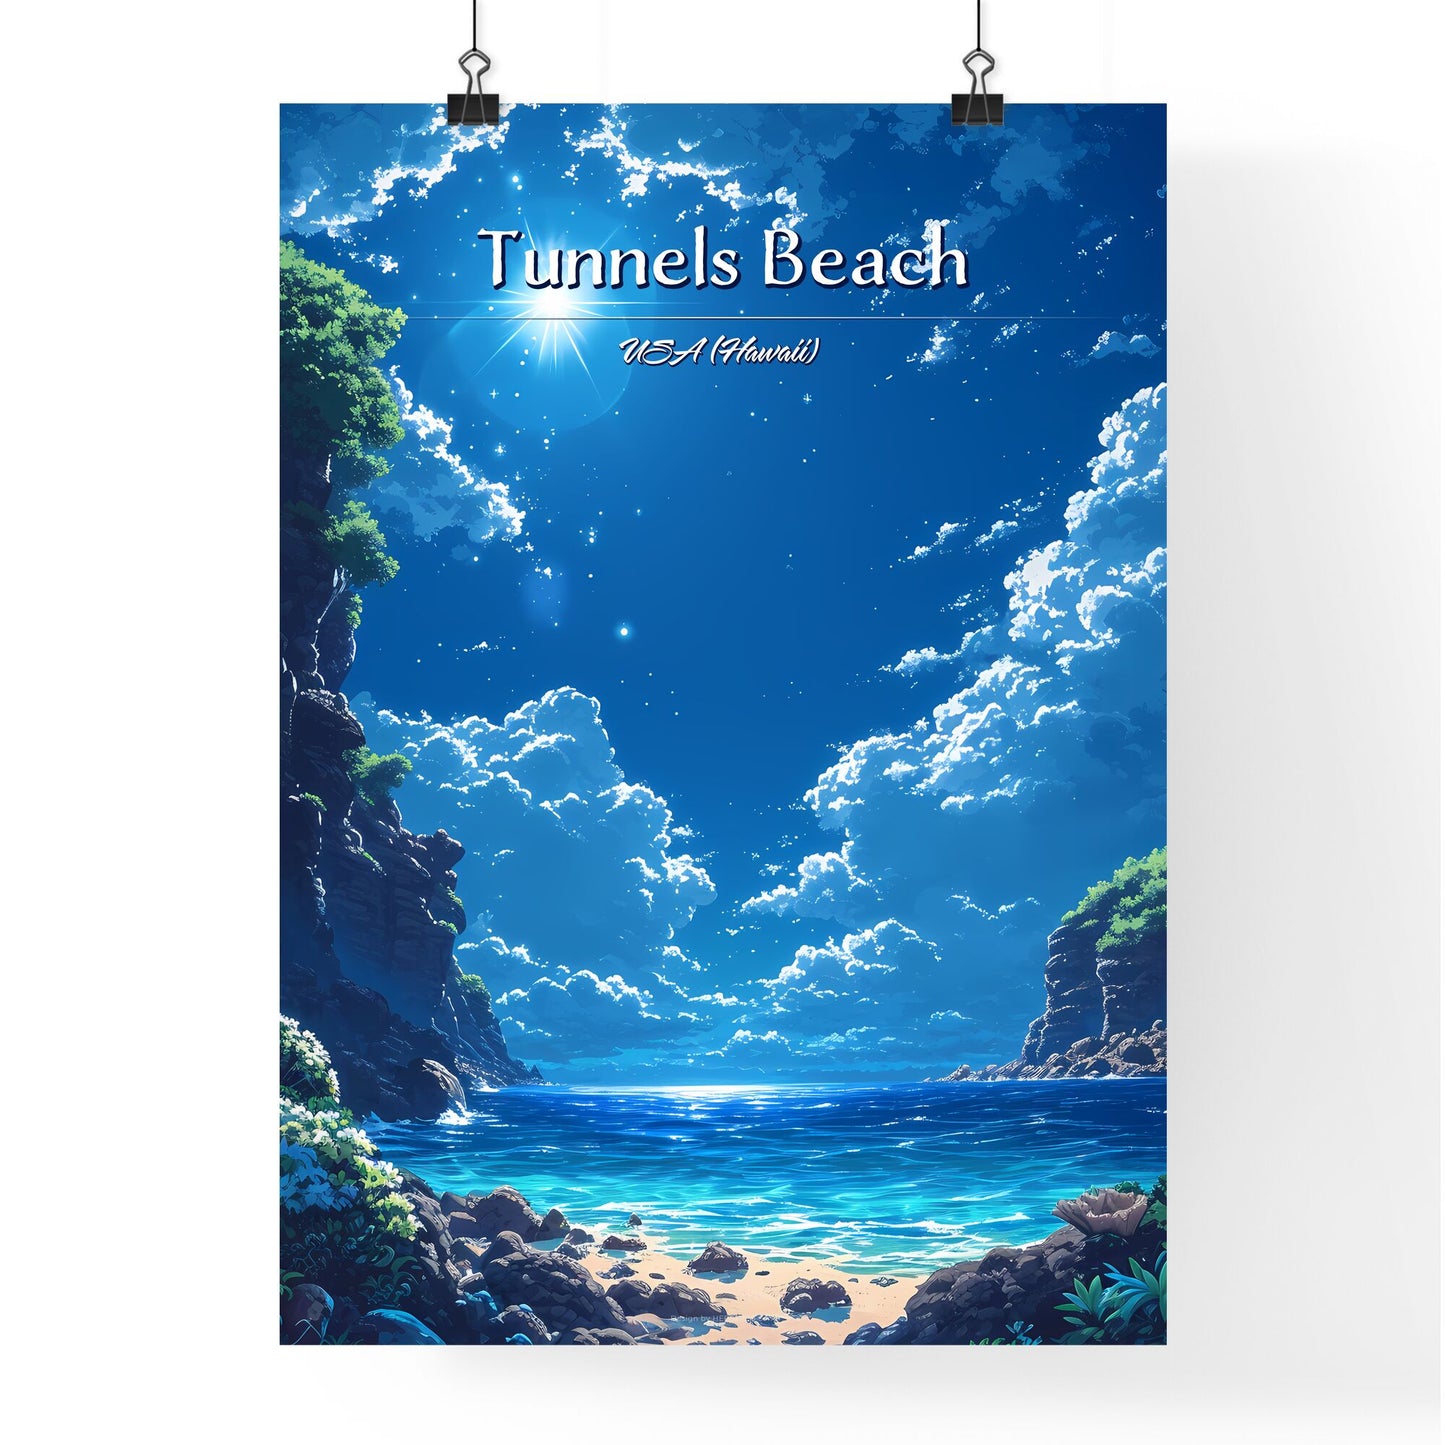 Tunnels Beach, USA (Hawaii) - Art print of a blue sky with clouds and a body of water Default Title